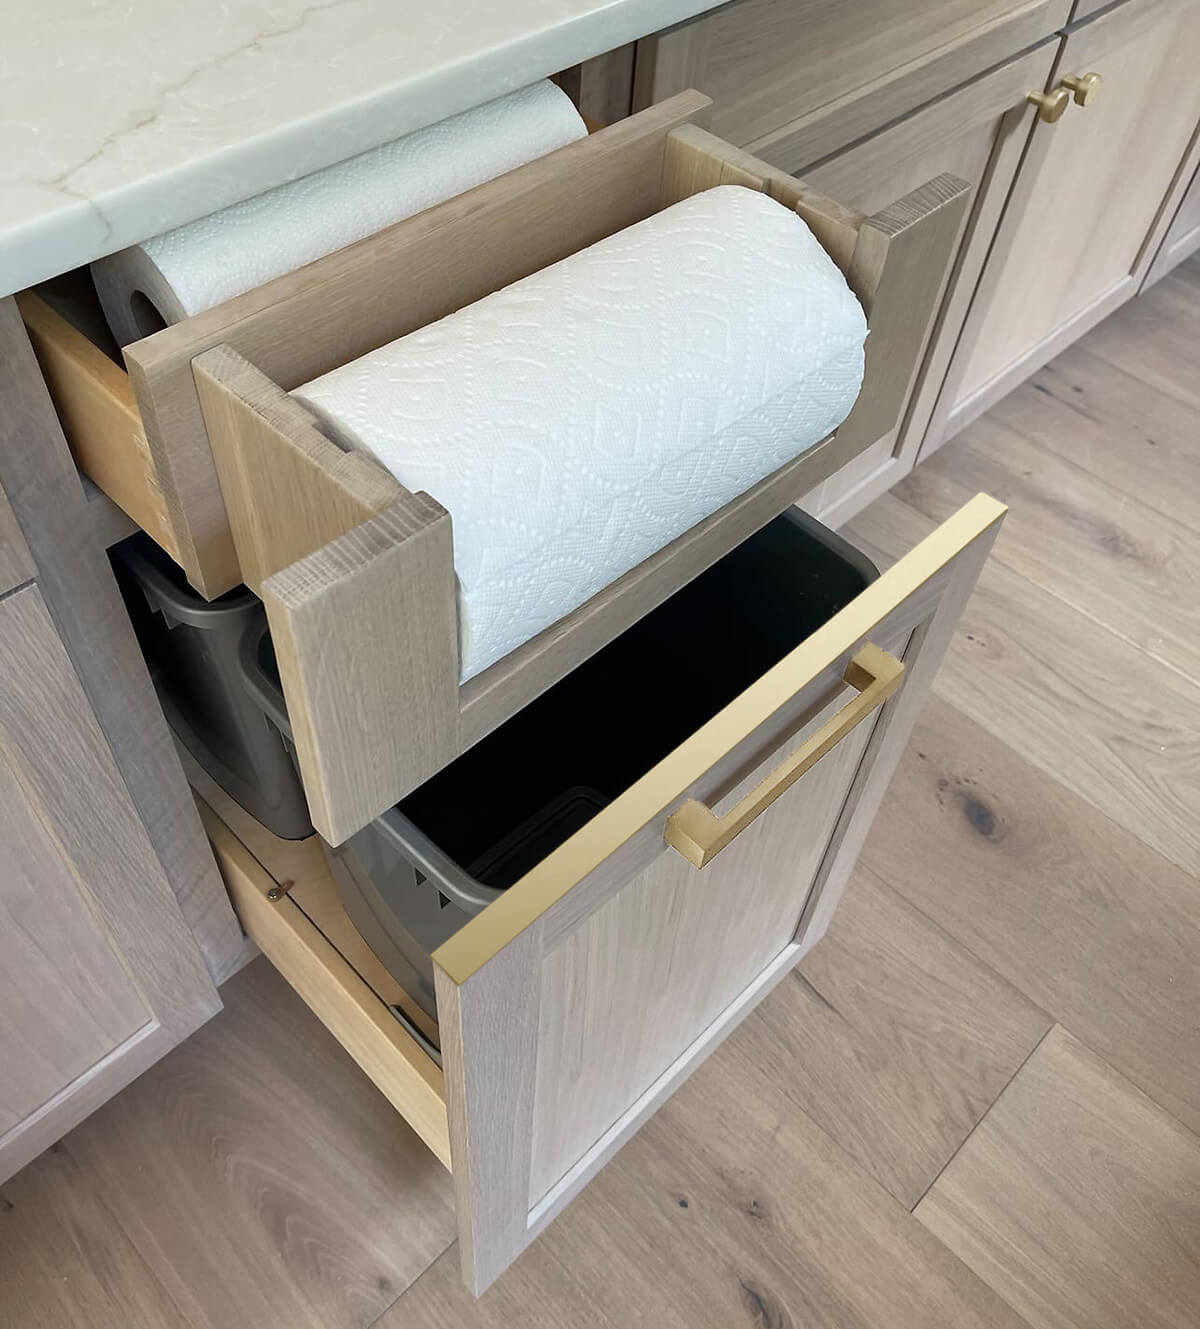 Paper Towel Drawer and Base Recycling Center Combo